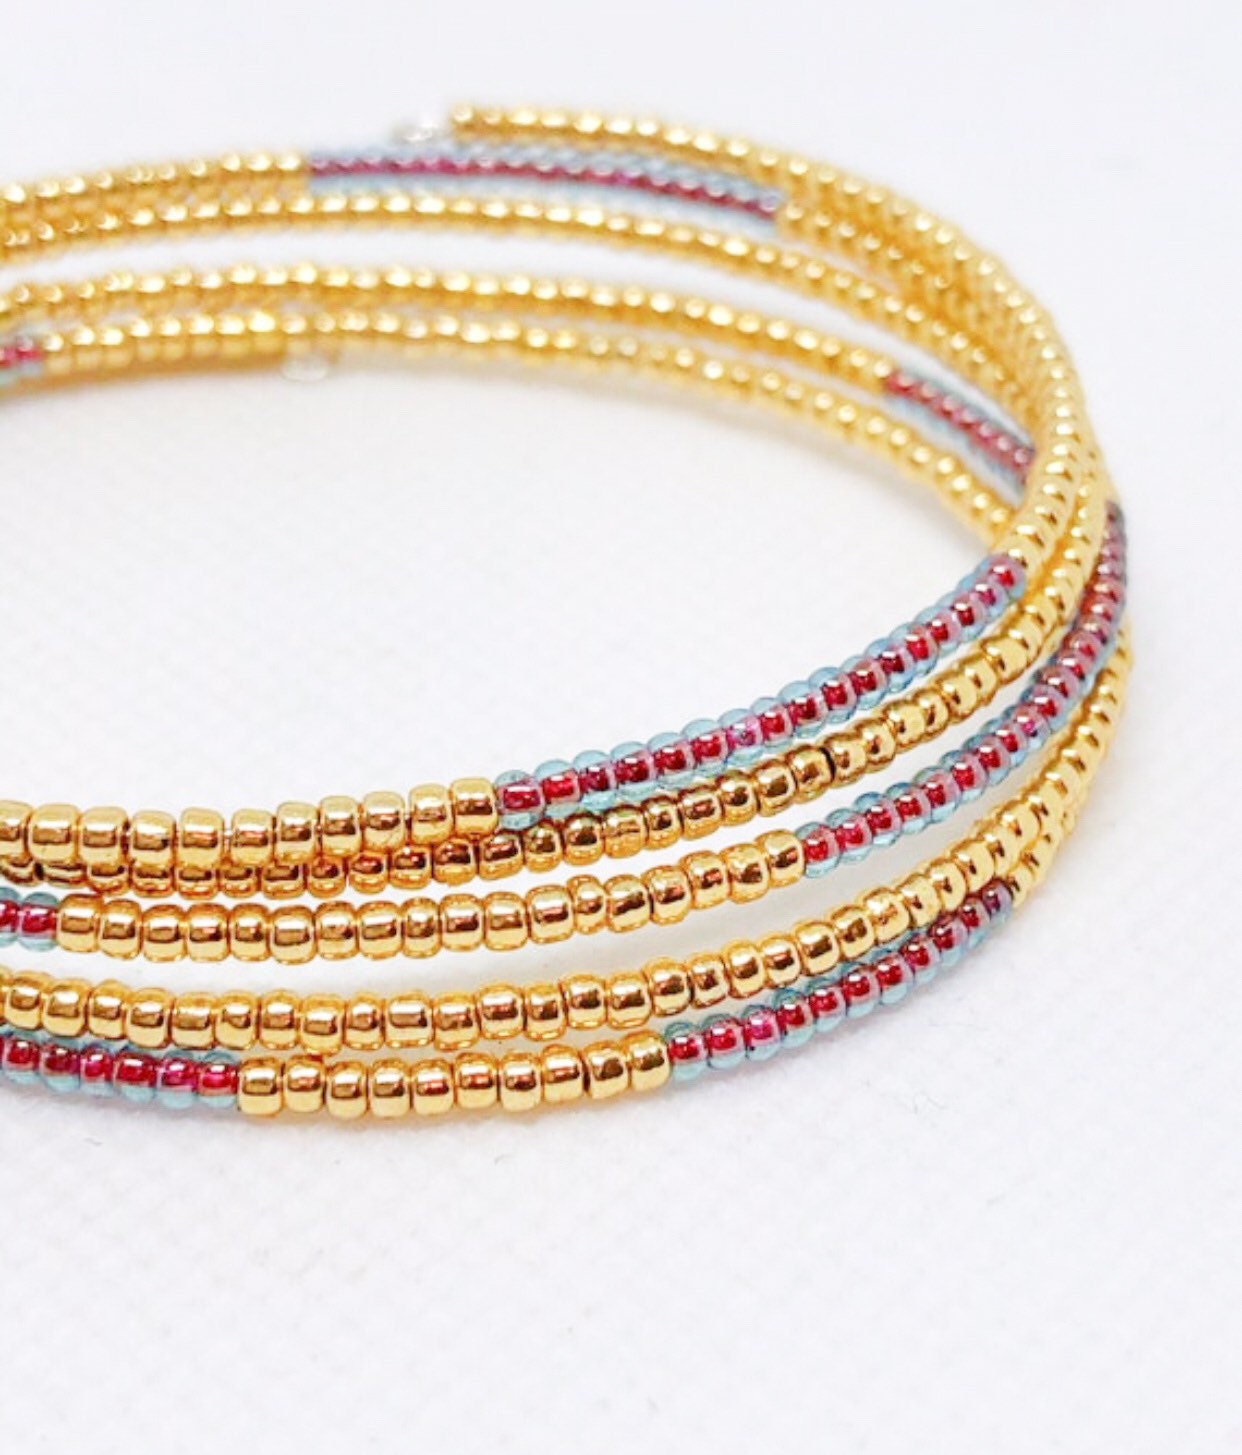 19 Colorful Memory Wire Bracelets